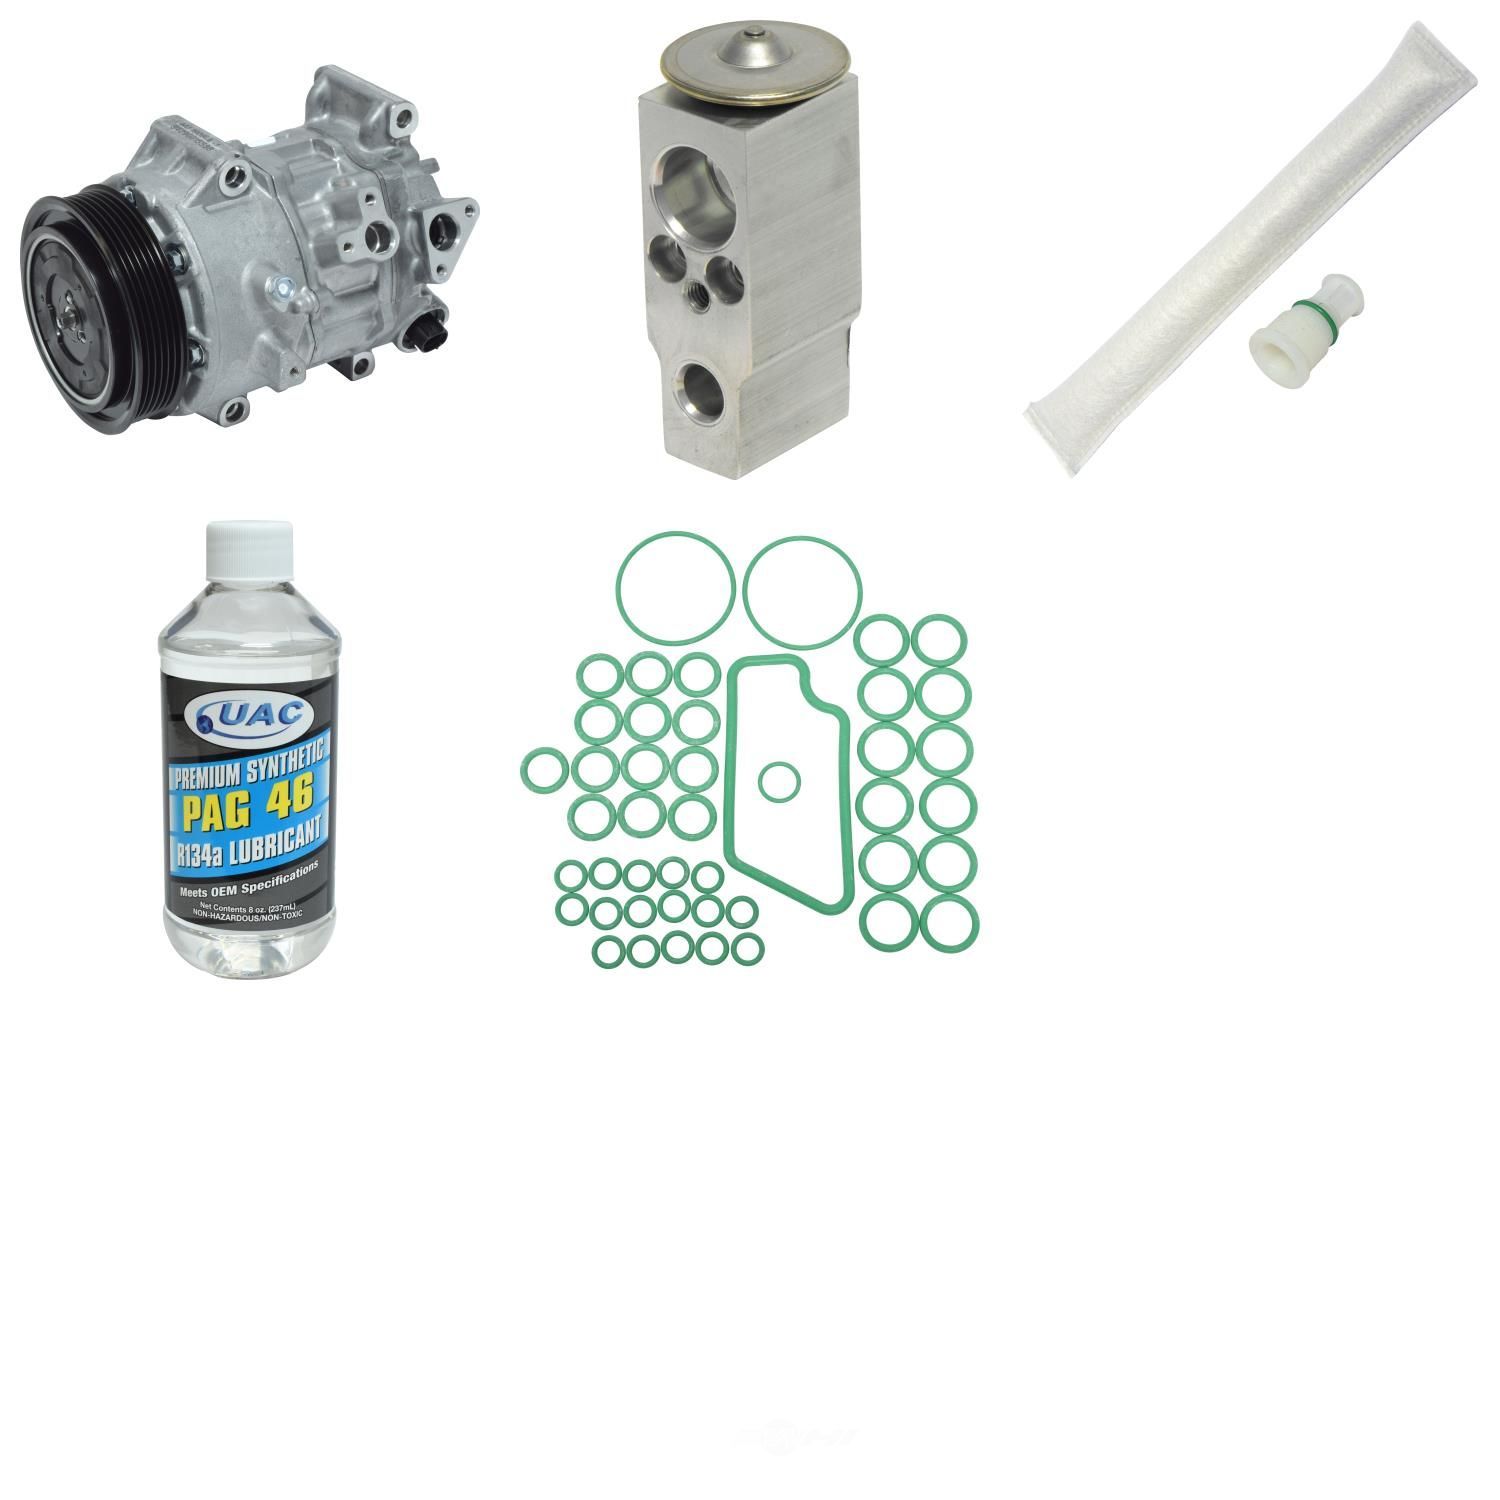 UNIVERSAL AIR CONDITIONER, INC. - Compressor Replacement Kit - UAC KT 5557